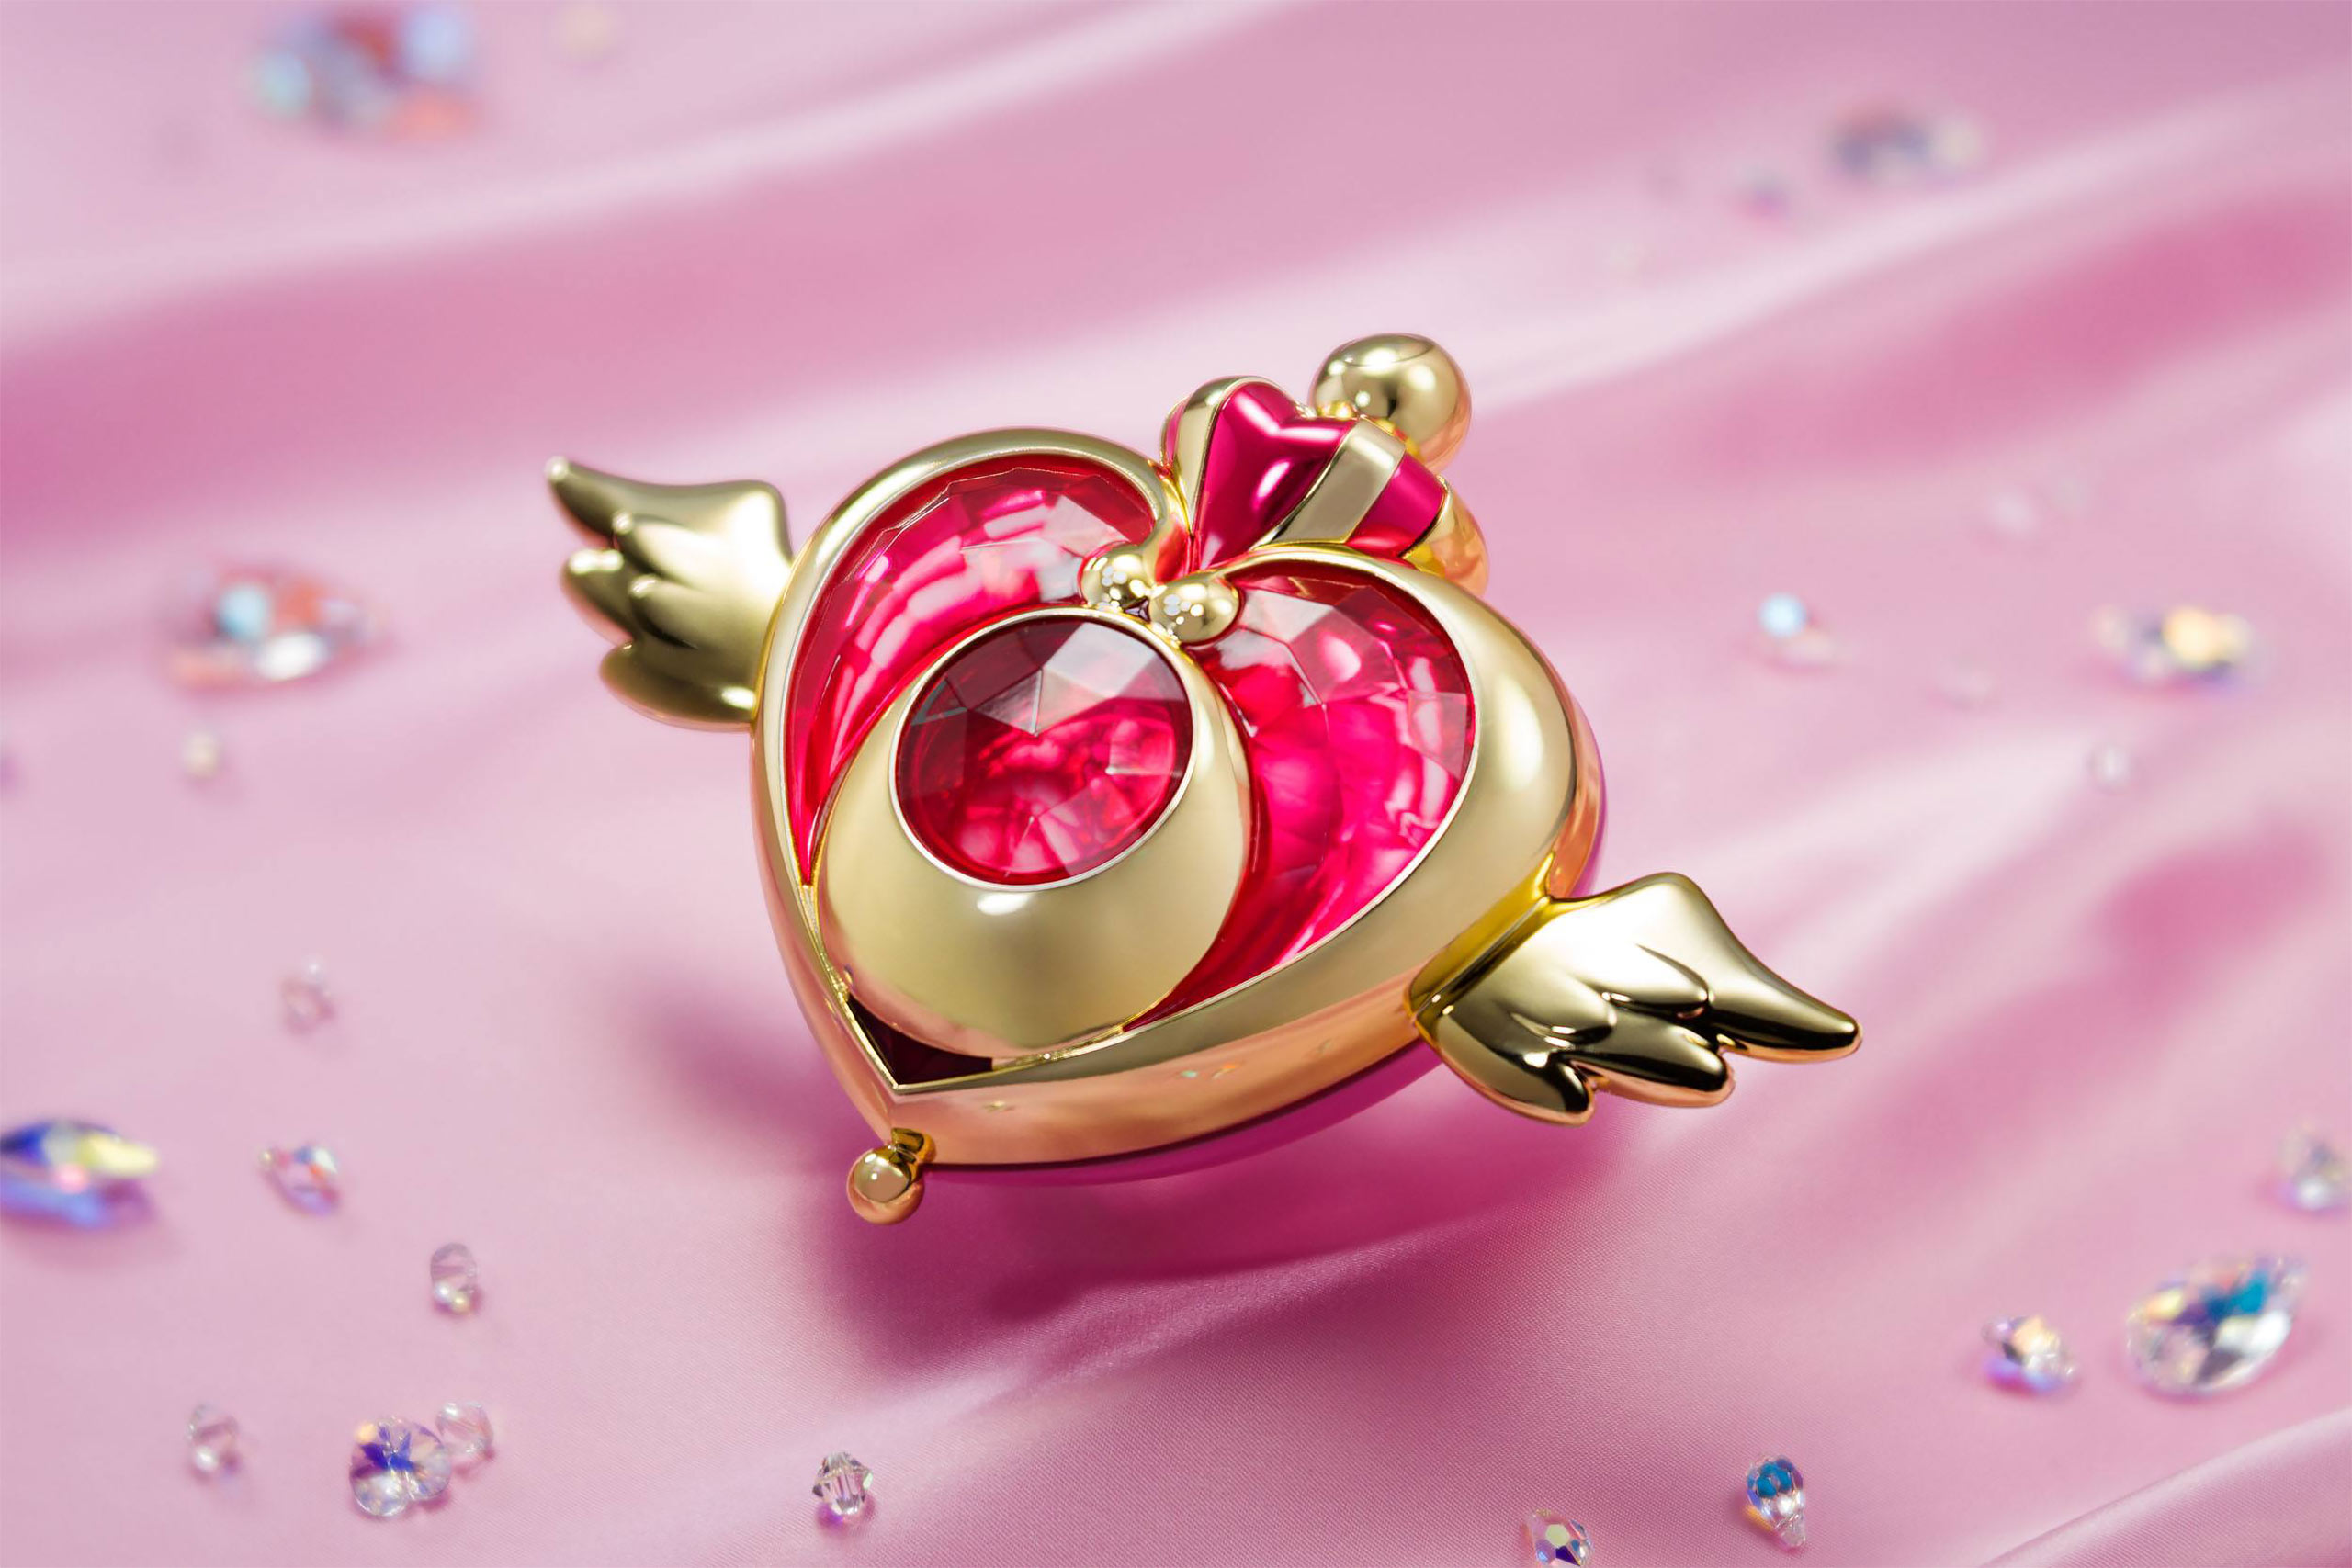 Sailor Moon - Crisis Moon Compact Transformation Brooch with Light and Sound Effects